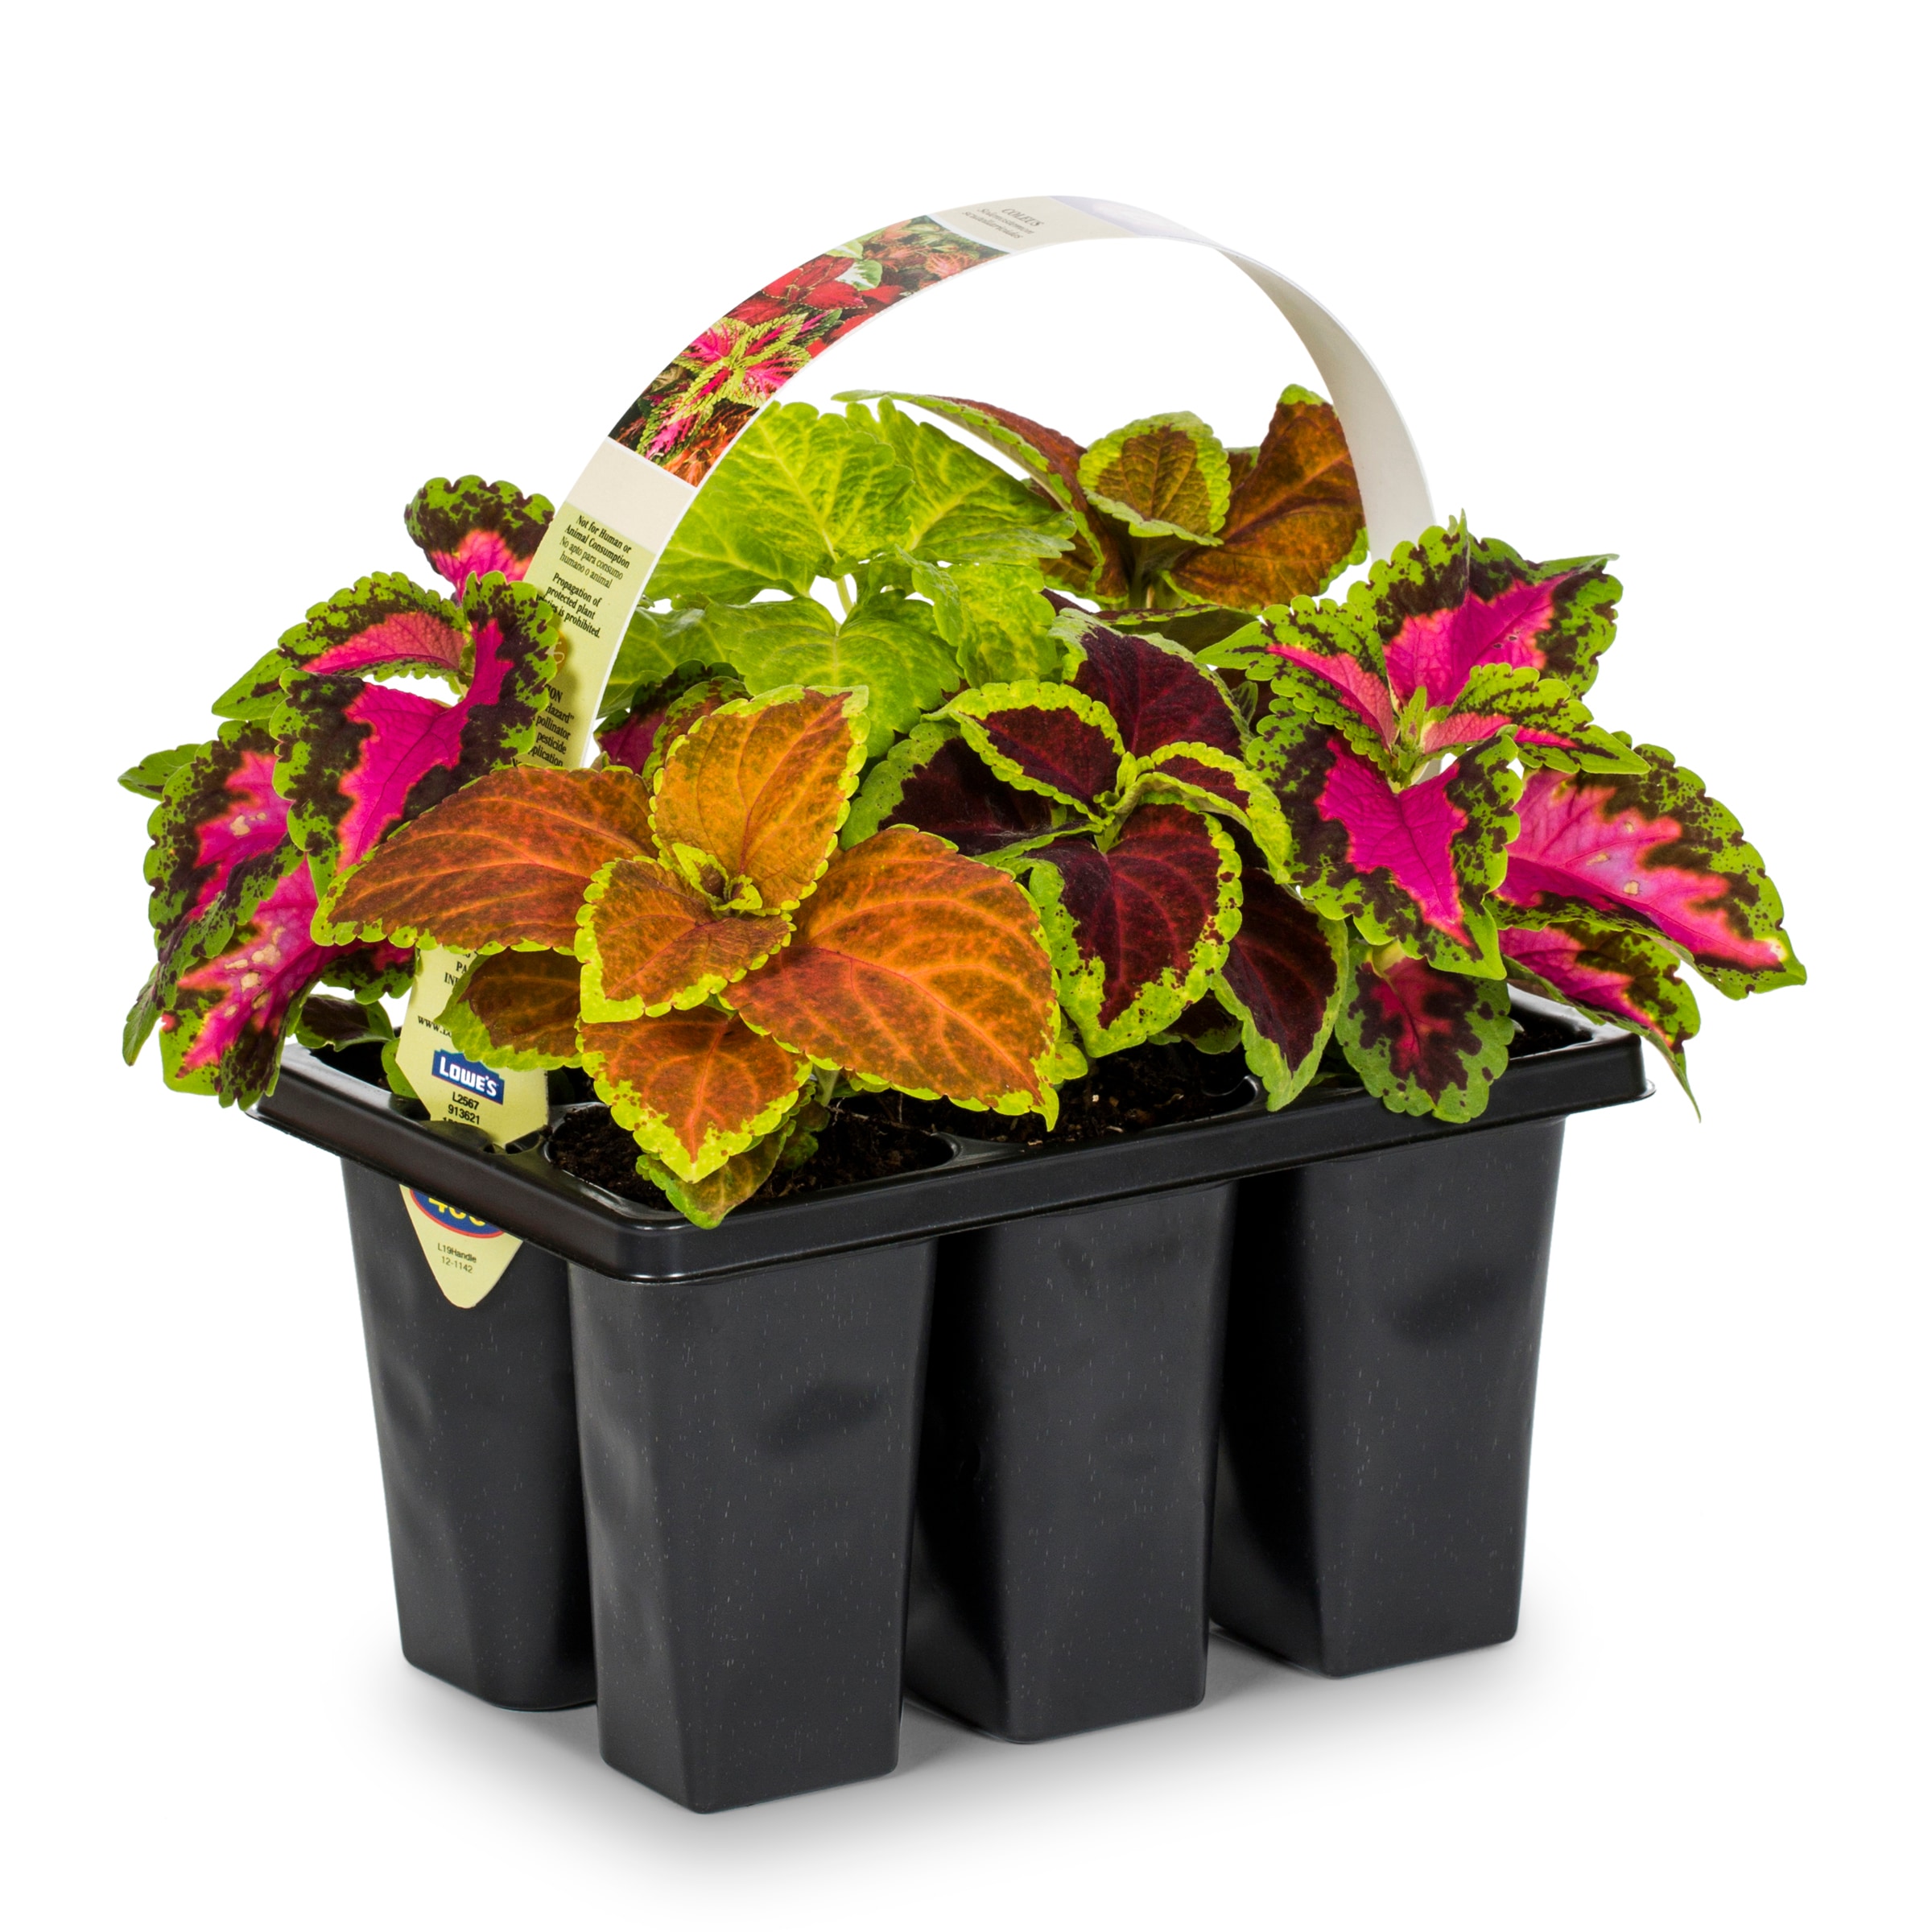 Lowe's Coleus in 6-Pack Tray in the department at Lowes.com